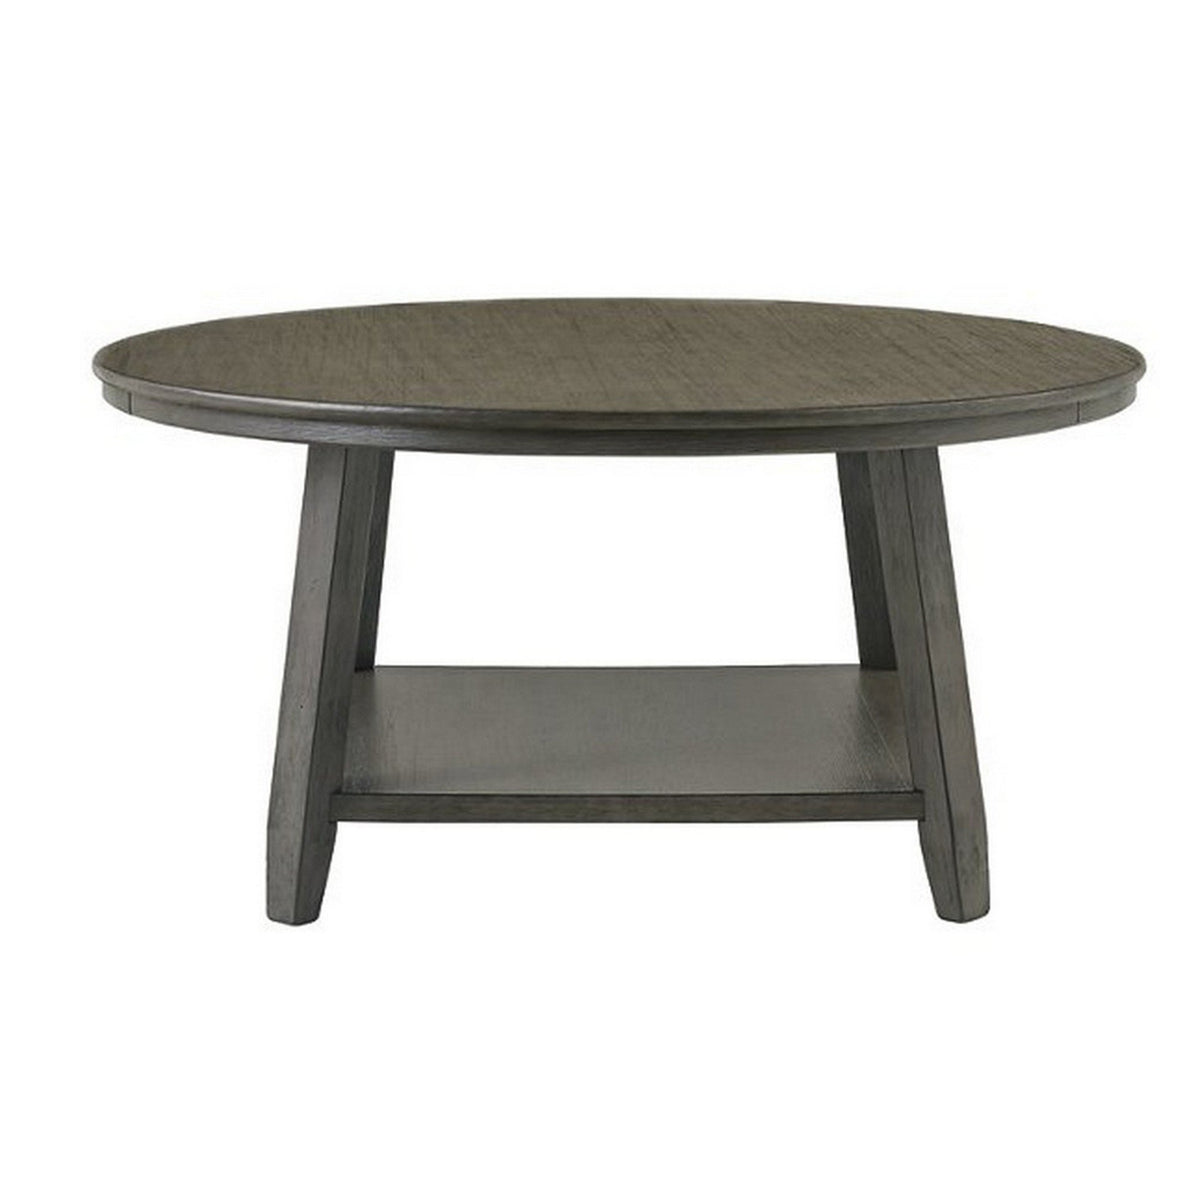 3 Piece Occasional Table Set with Open Bottom Shelf, Antique Gray - BM227574